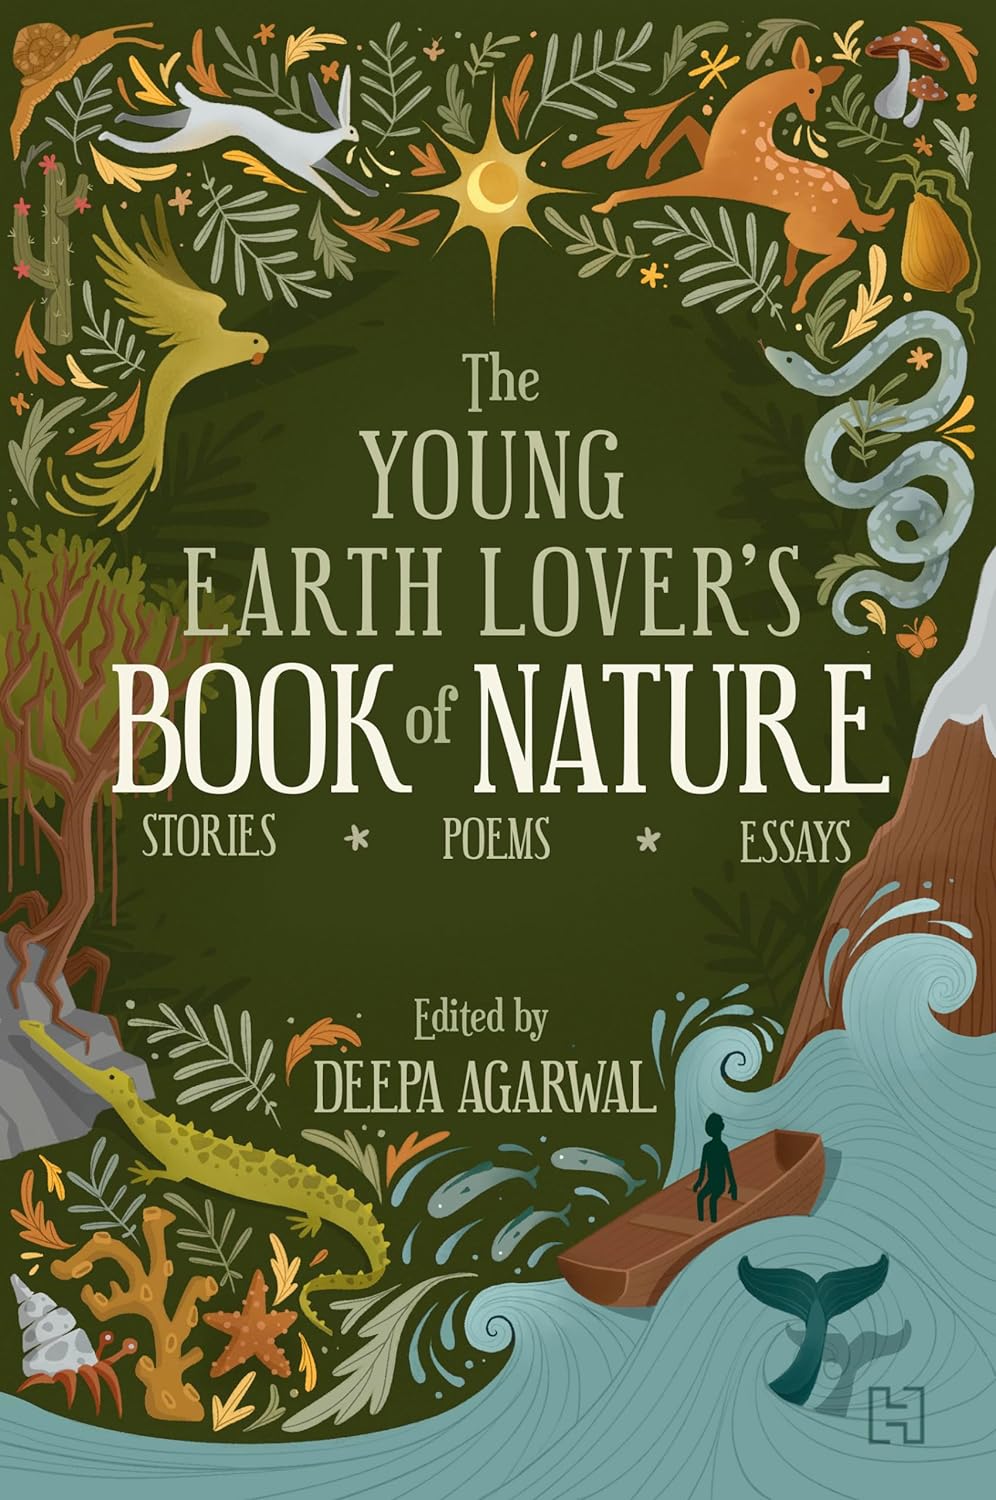 The Young Earth Lover's Book of Nature: Stories, Poems, Essays